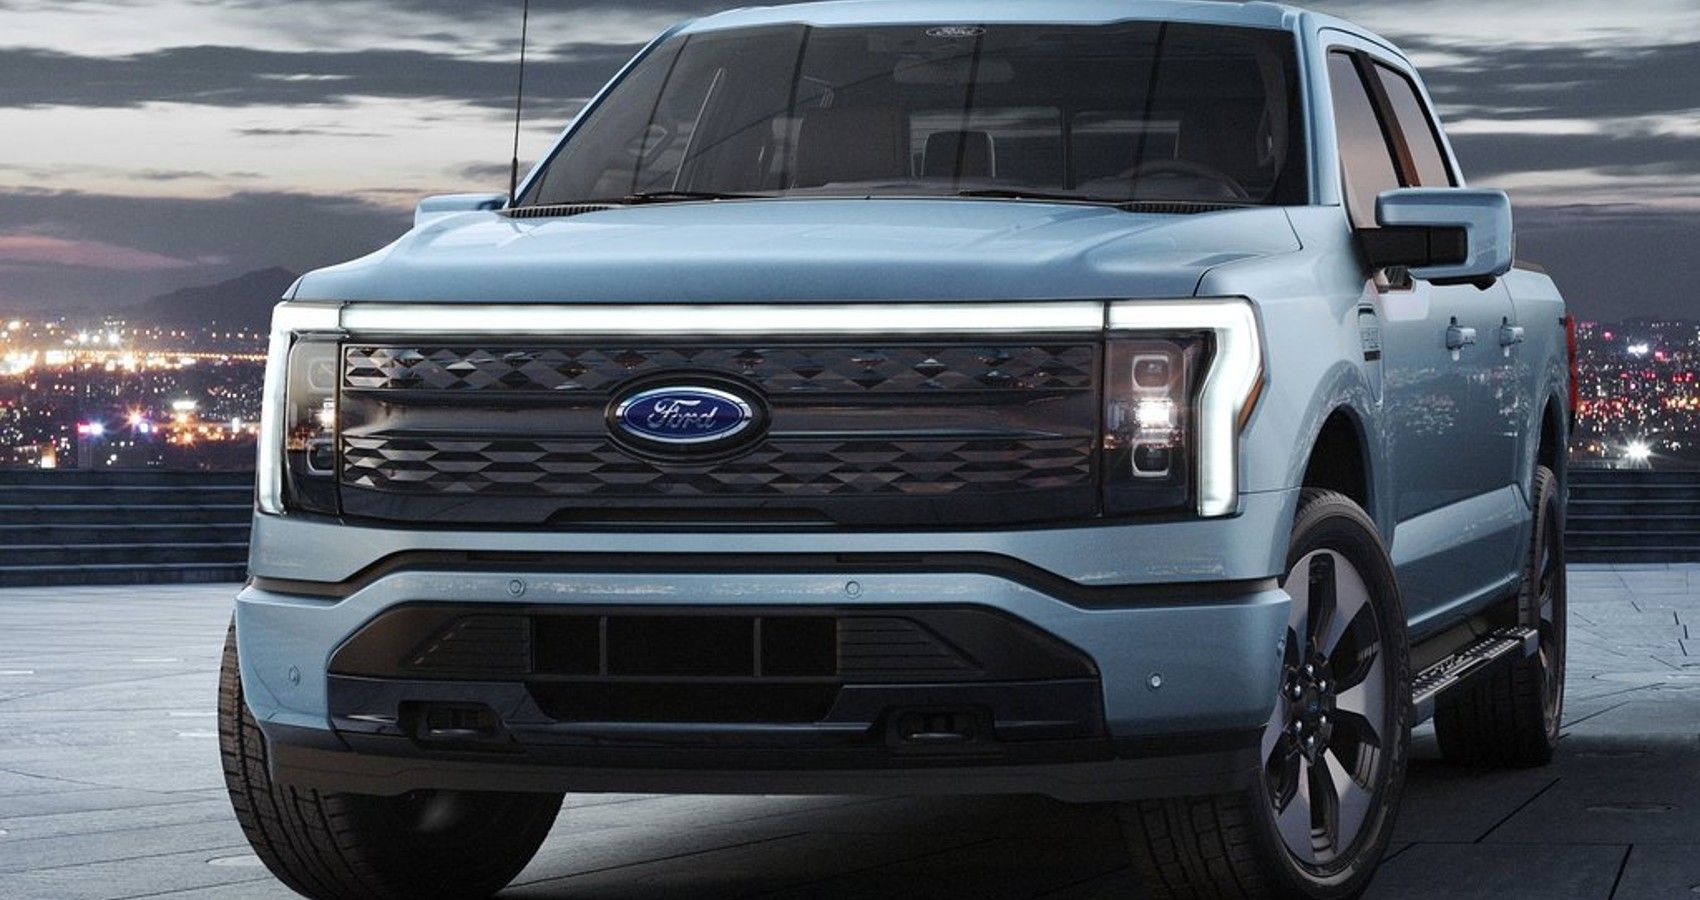 Used Ford F-150 Lightning Electric Pickup Truck Prices Are Simply Ridiculous